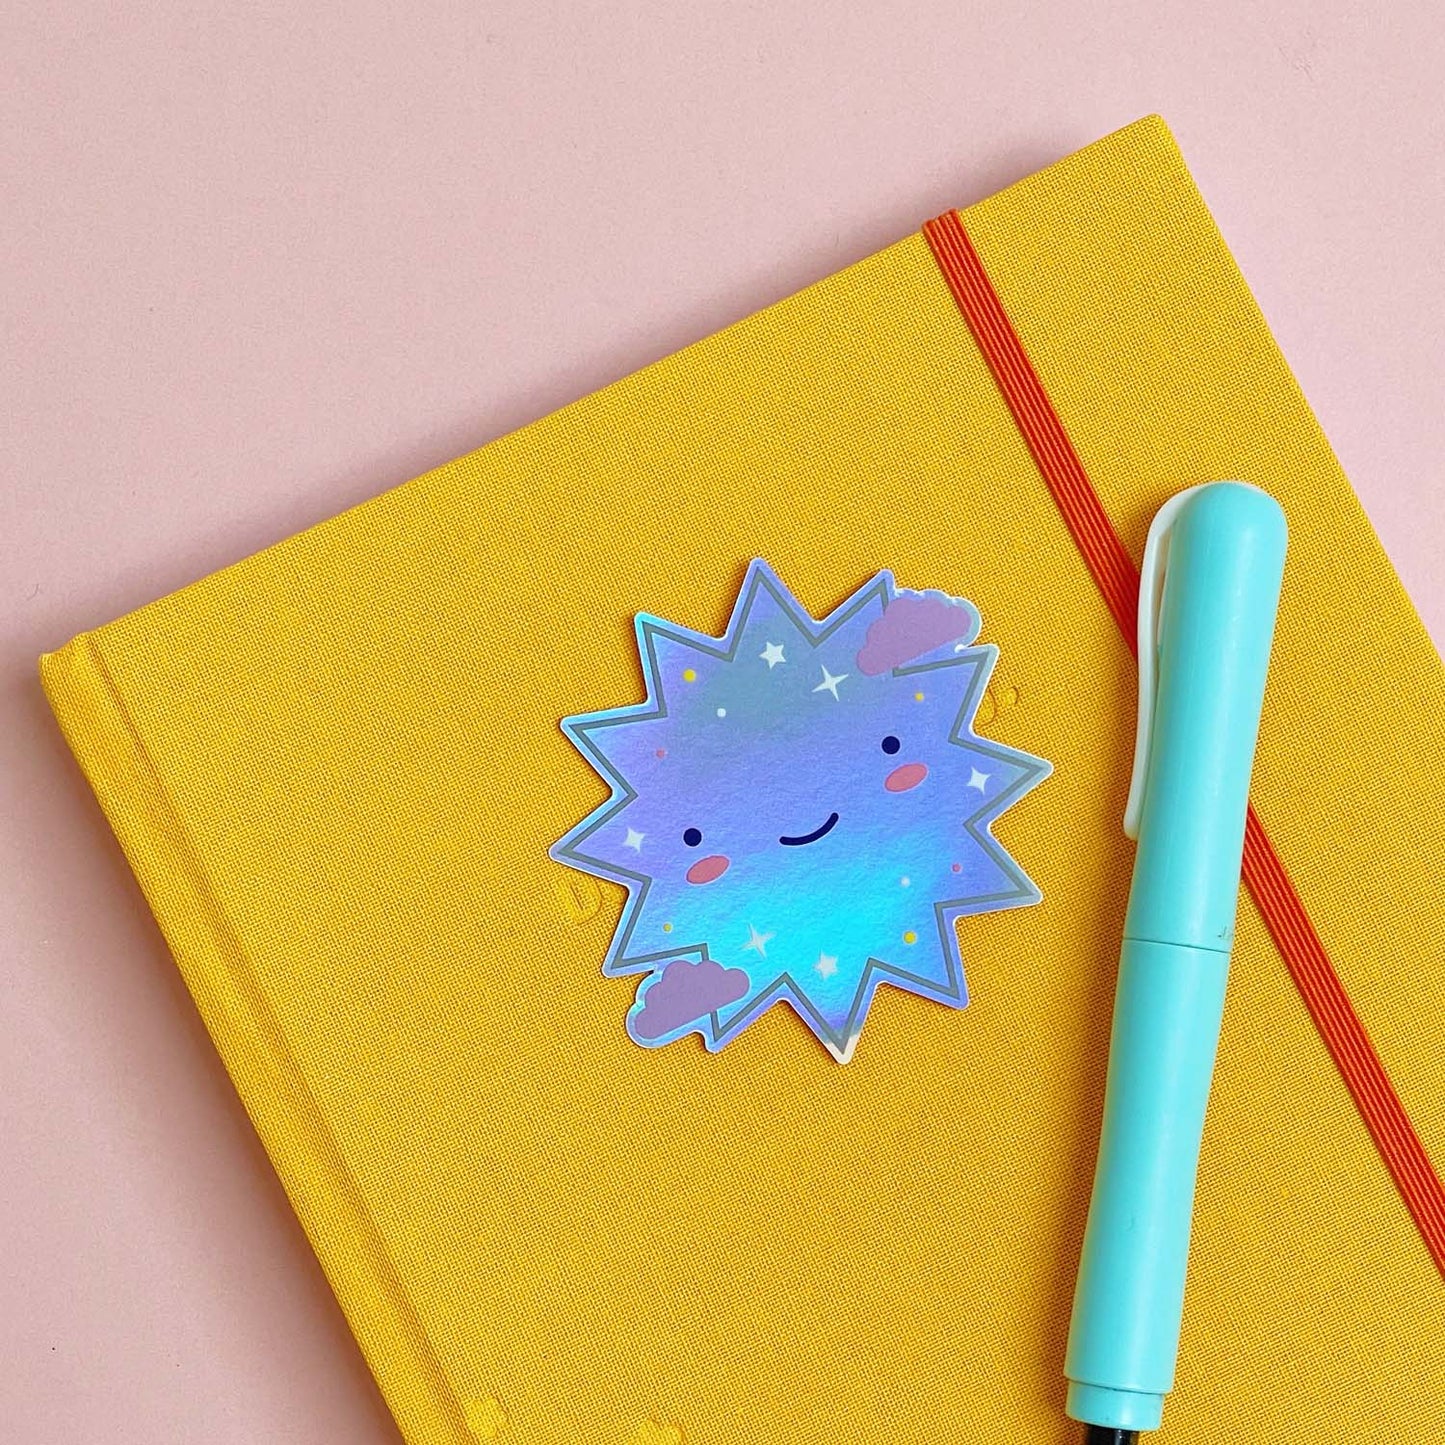 A shiny iridescent holographic vinyl sticker featuring a smiling starburst lying on top of a yellow journal on a pink background